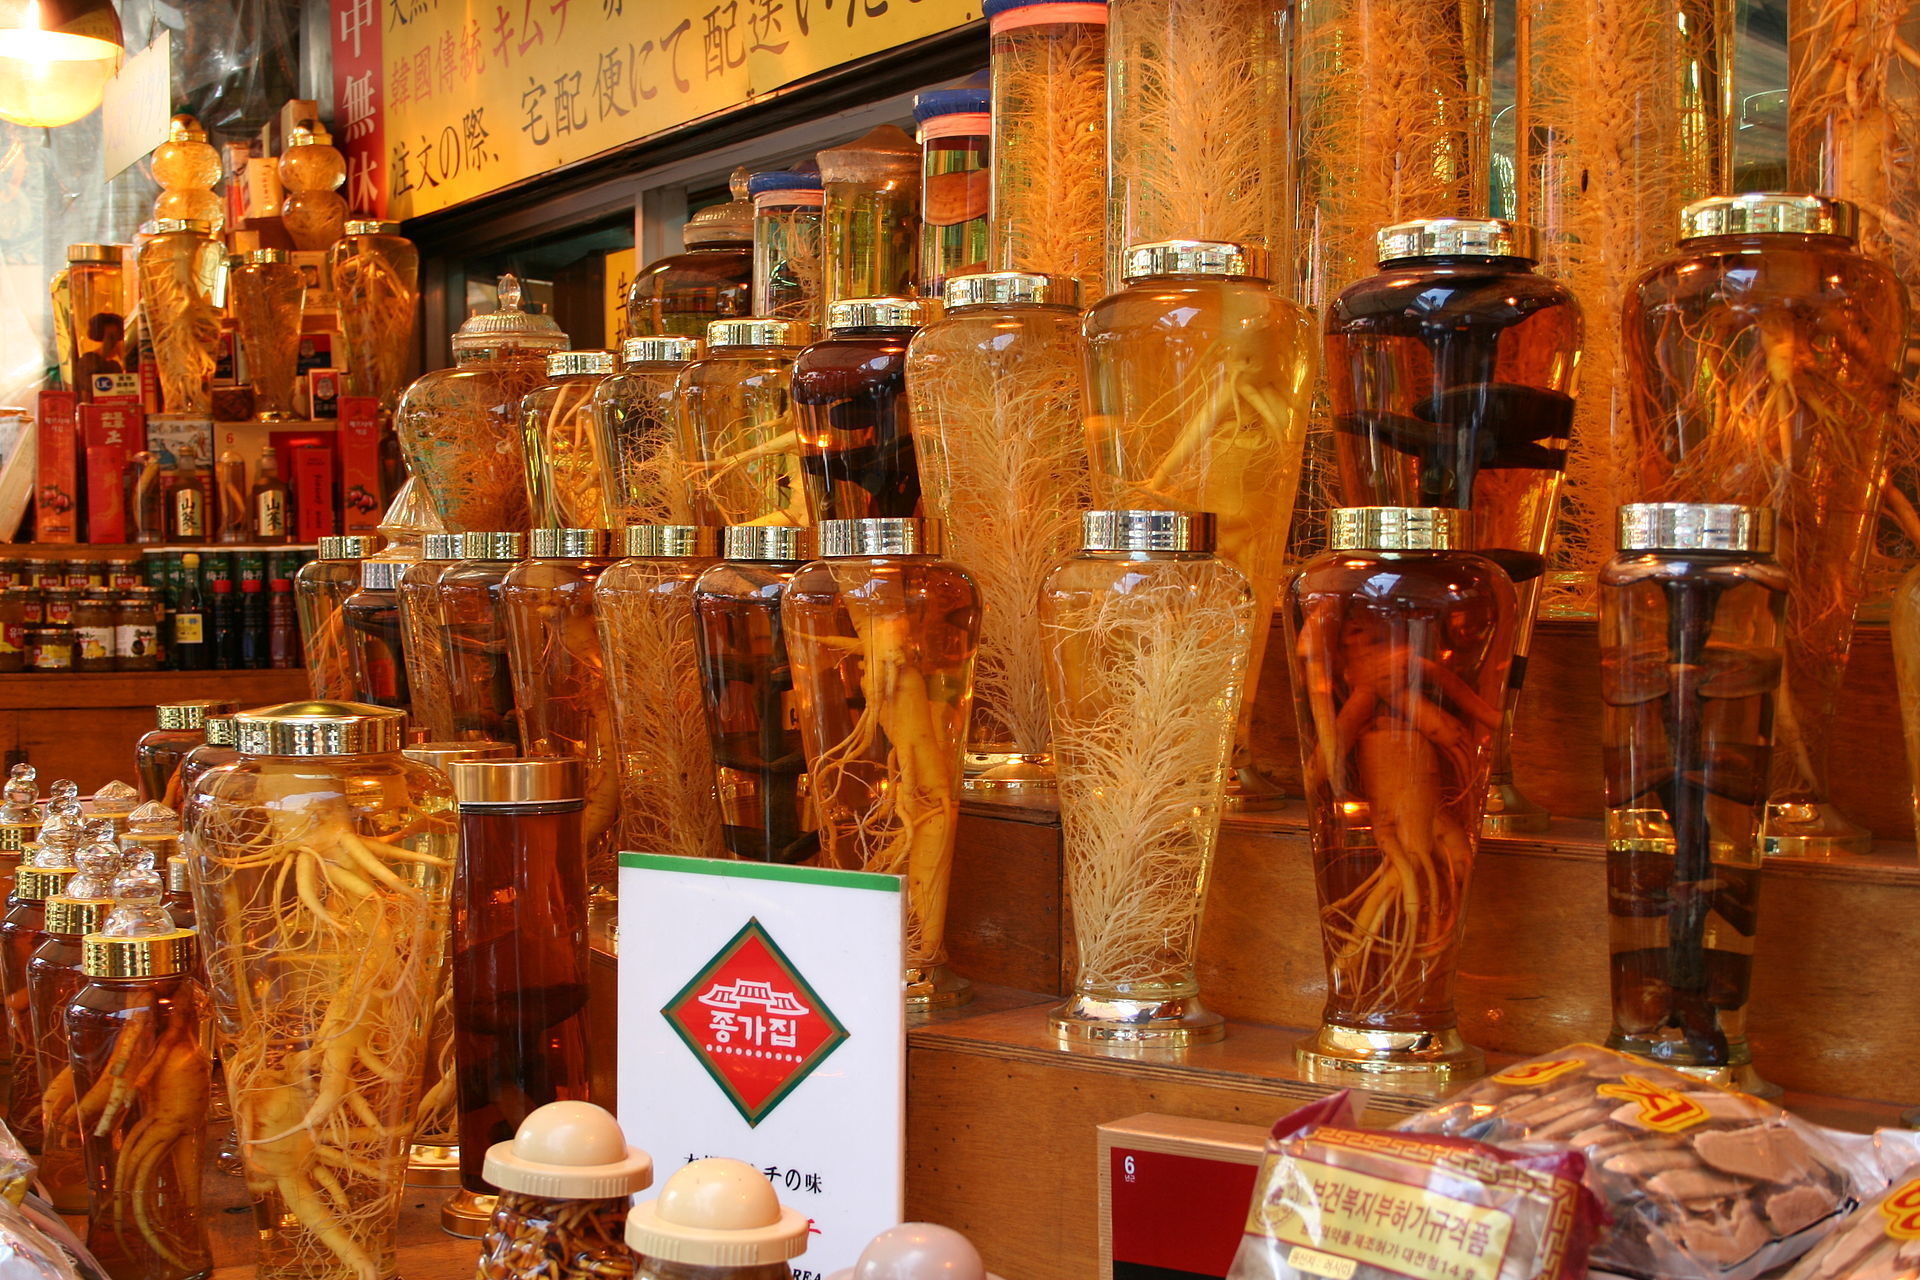 ginseng in glass jars in a Chinese store